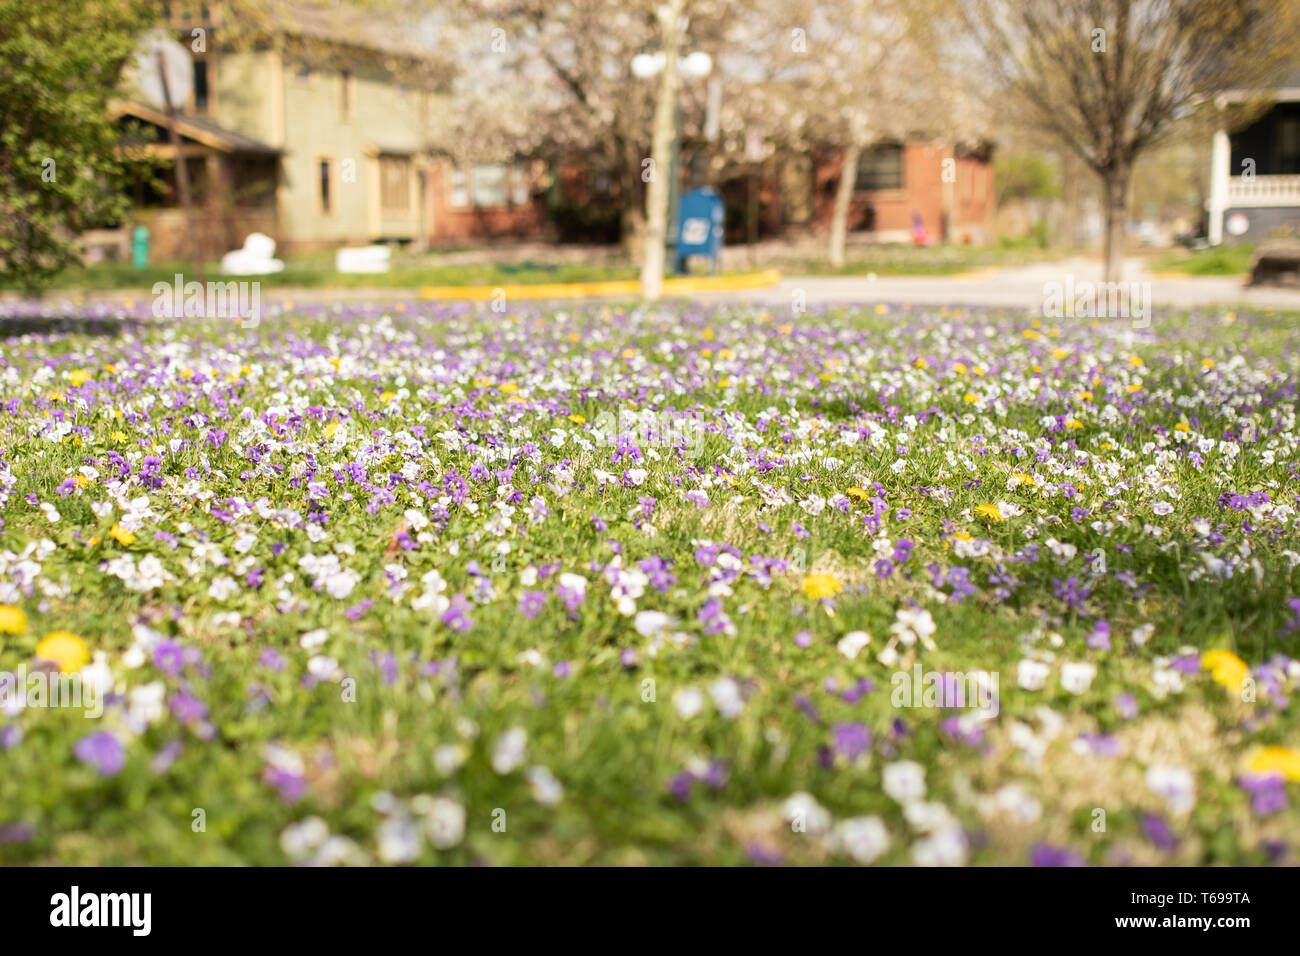 A grass lawn overflowing with Viola tricolor, also known as wild pansy, heartsease, or Johnny jump up, in Indianapolis, Indiana, USA. Stock Photo